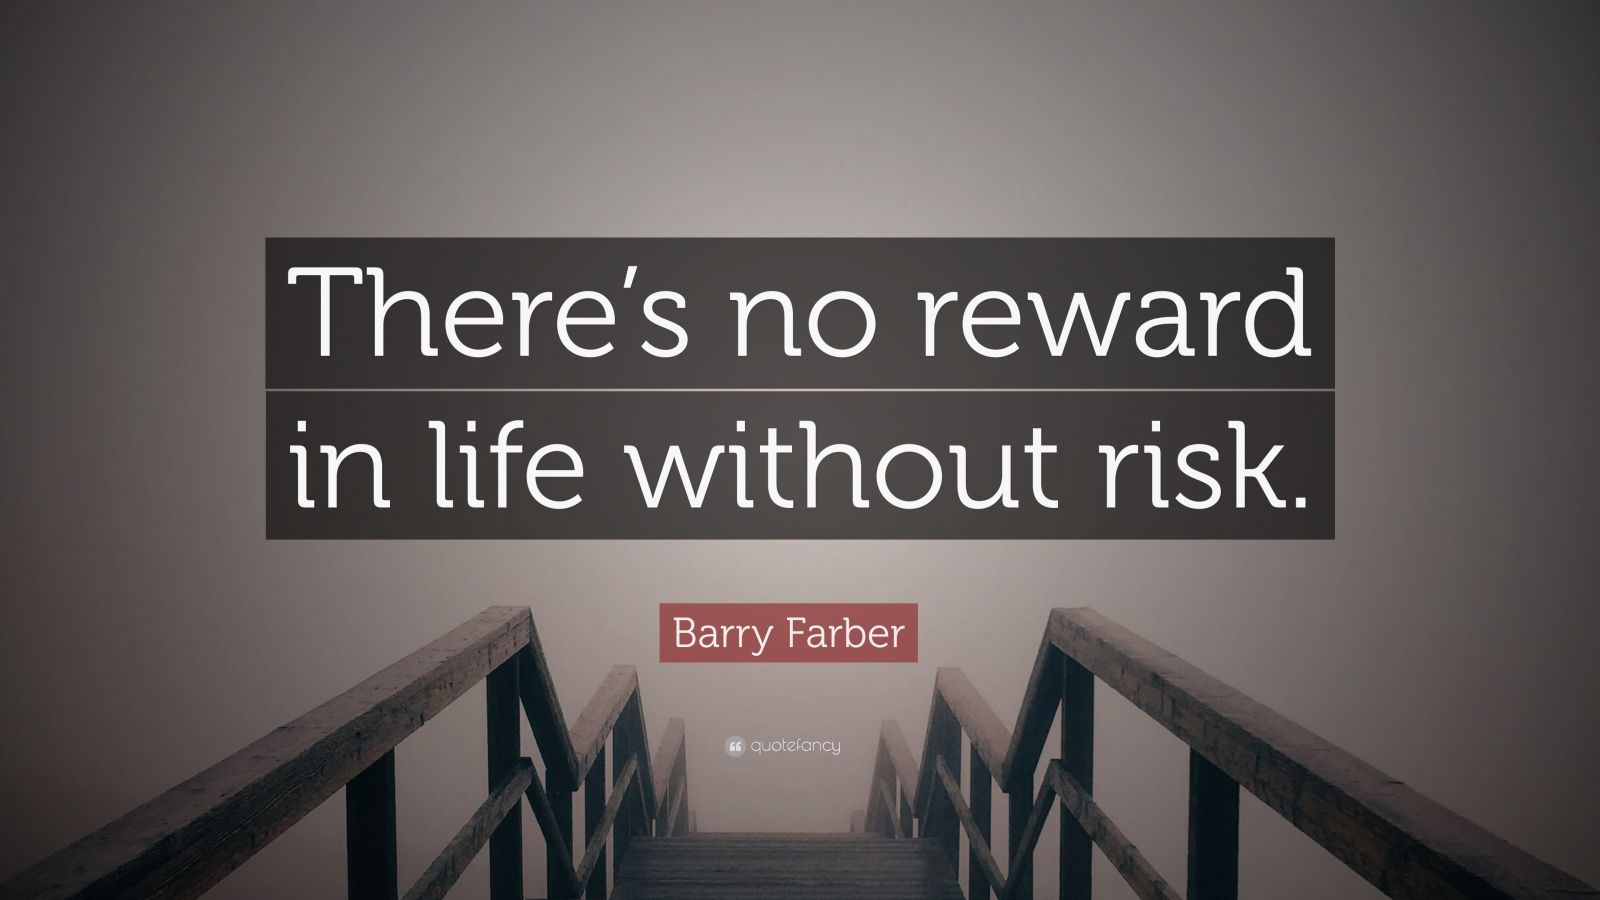 Barry Farber Quote: “There’s no reward in life without risk.” (7